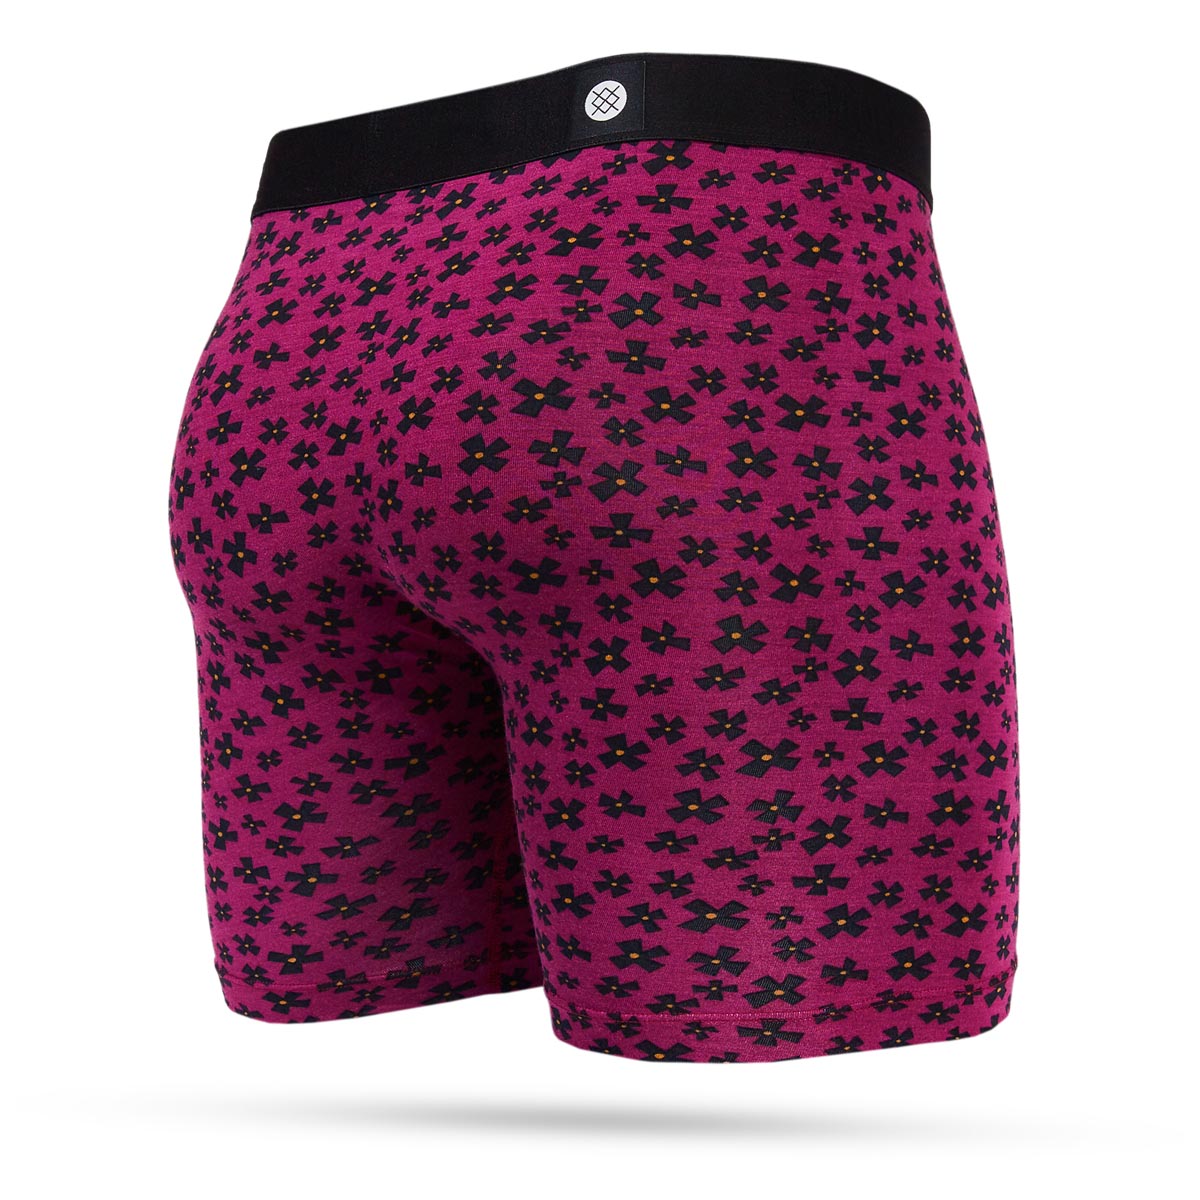 Stance Pixelower Wholester Boxer Brief - Berry image 2